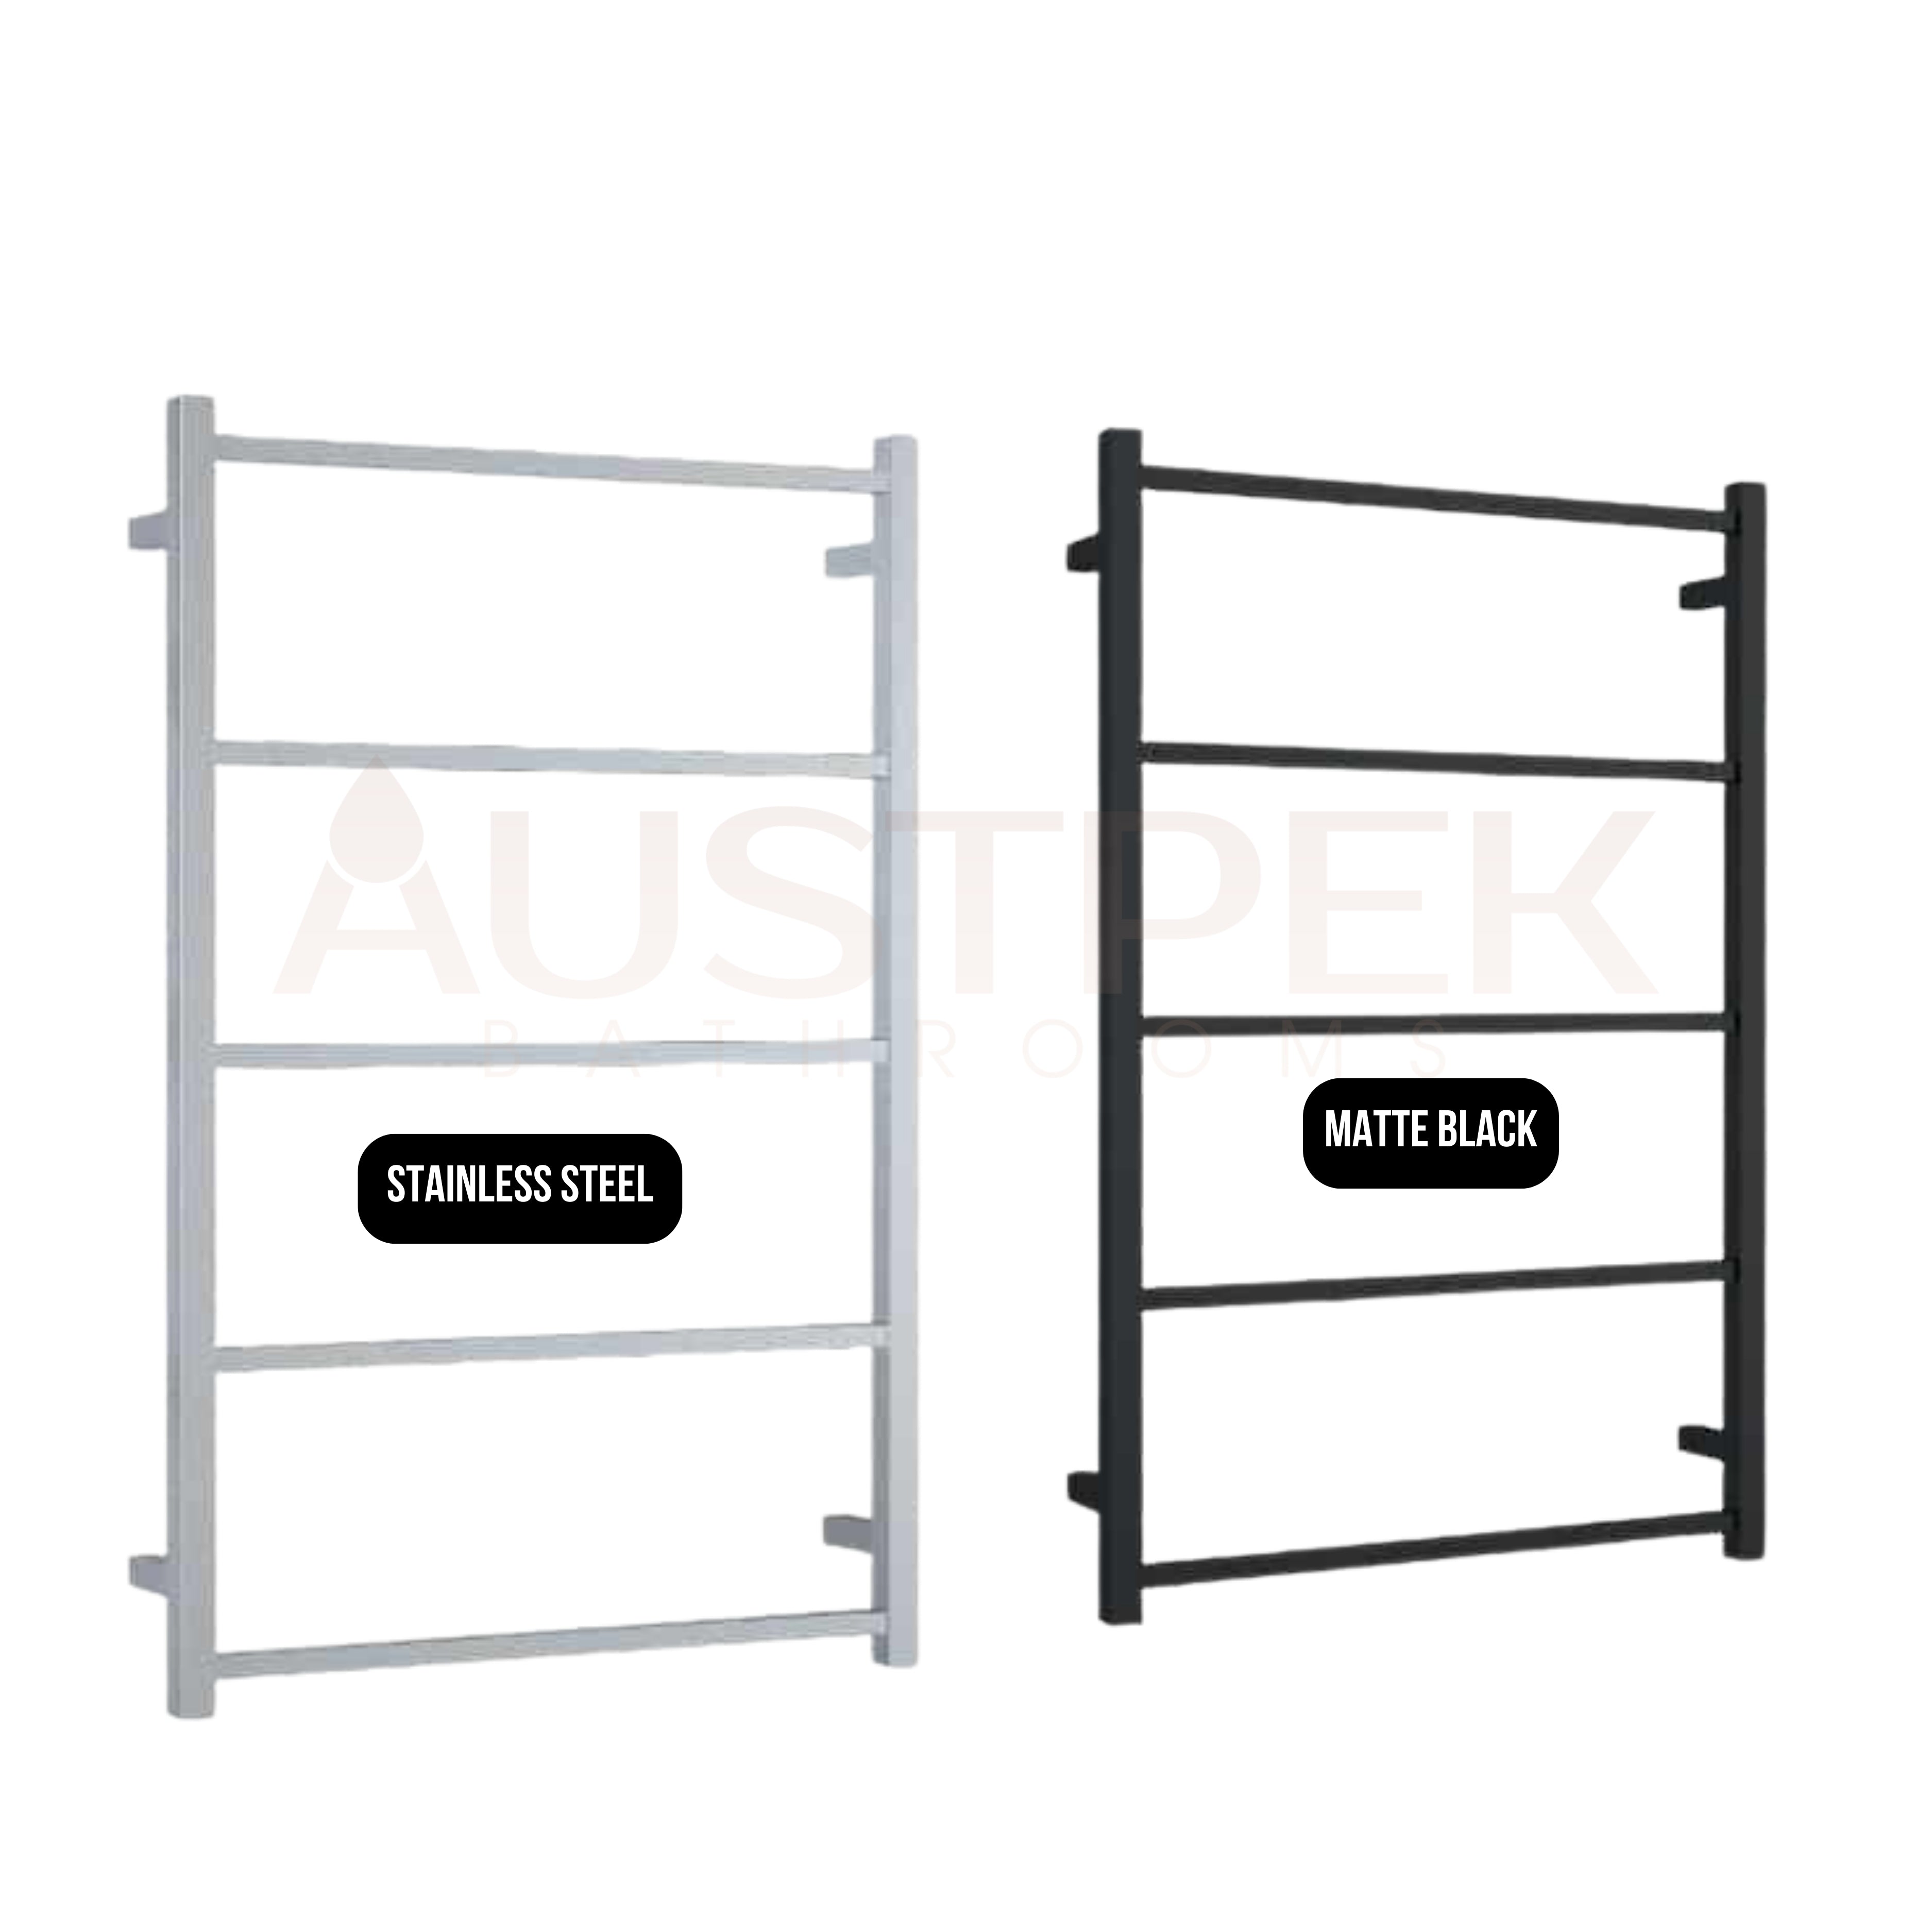 THERMOGROUP SQUARE NON-HEATED LADDER TOWEL RAIL MATTE BLACK 650MM